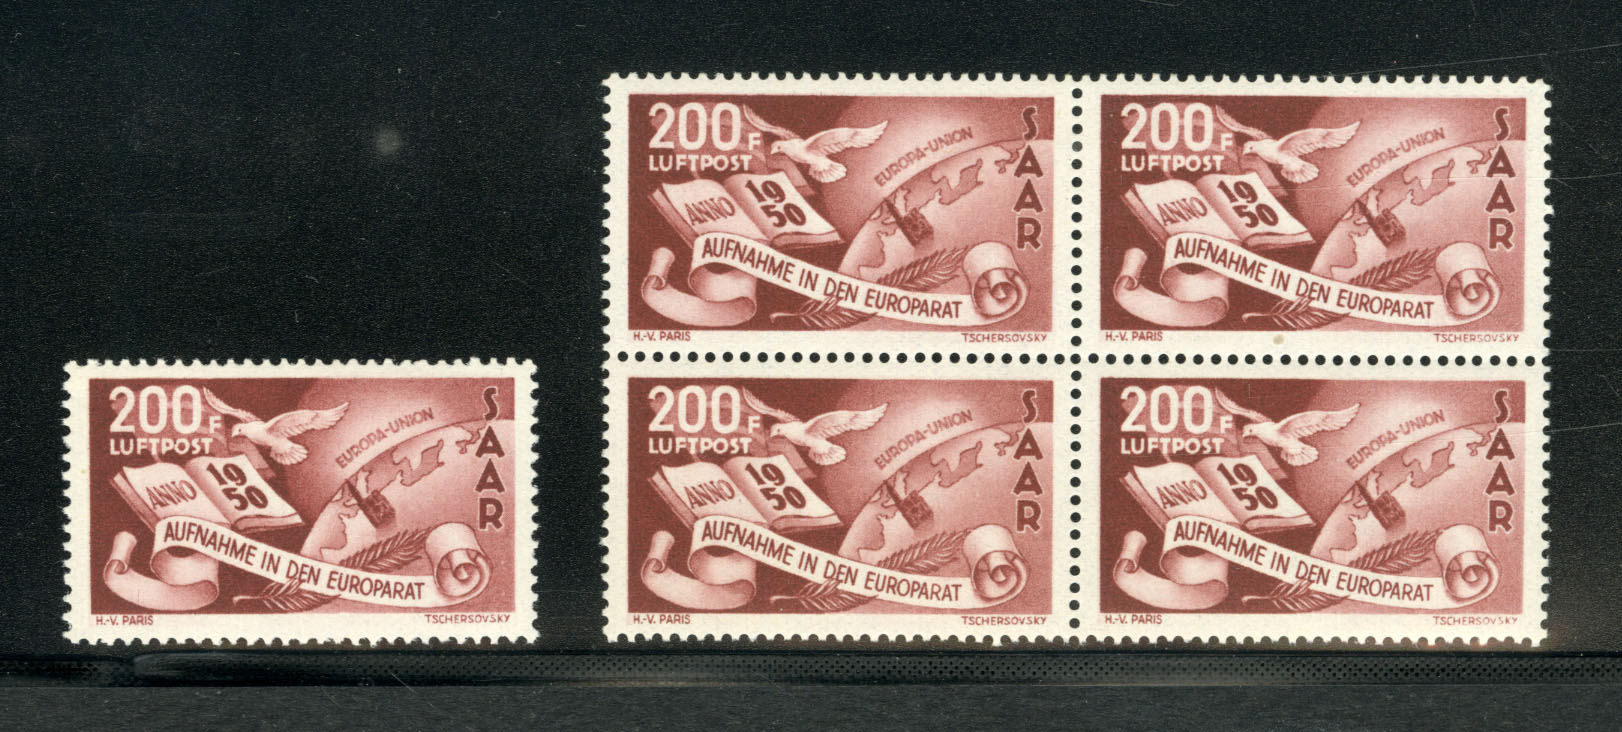 Lot 1275 - RUSSIA RUSSIAN OFFICES IN THE TURKISH EMPURE  -  Cherrystone Auctions U.S. & Worldwide Stamps & Postal History